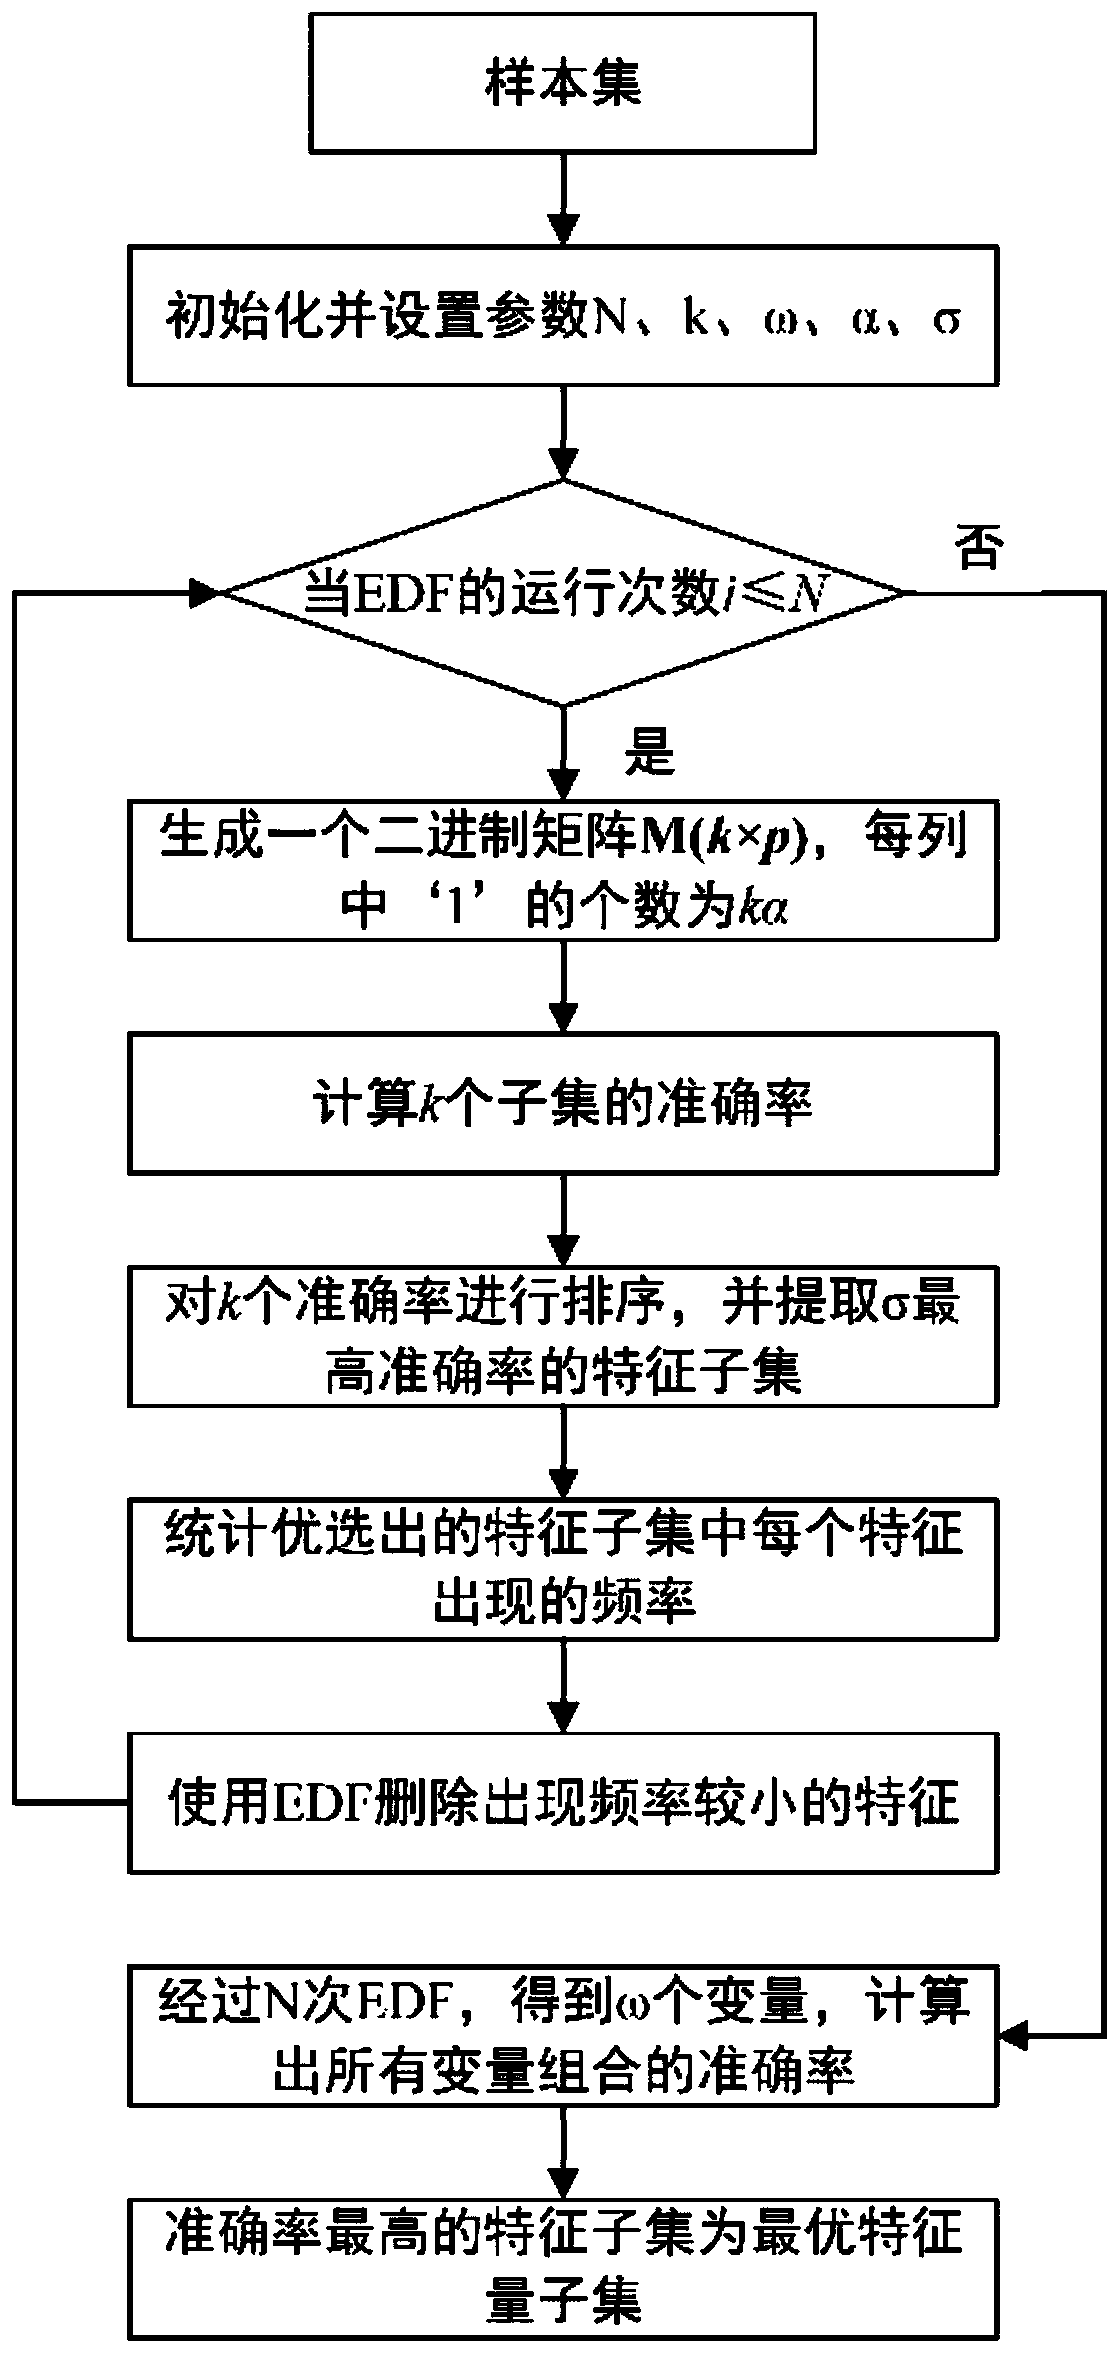 Electroencephalogram feature extraction and selection method